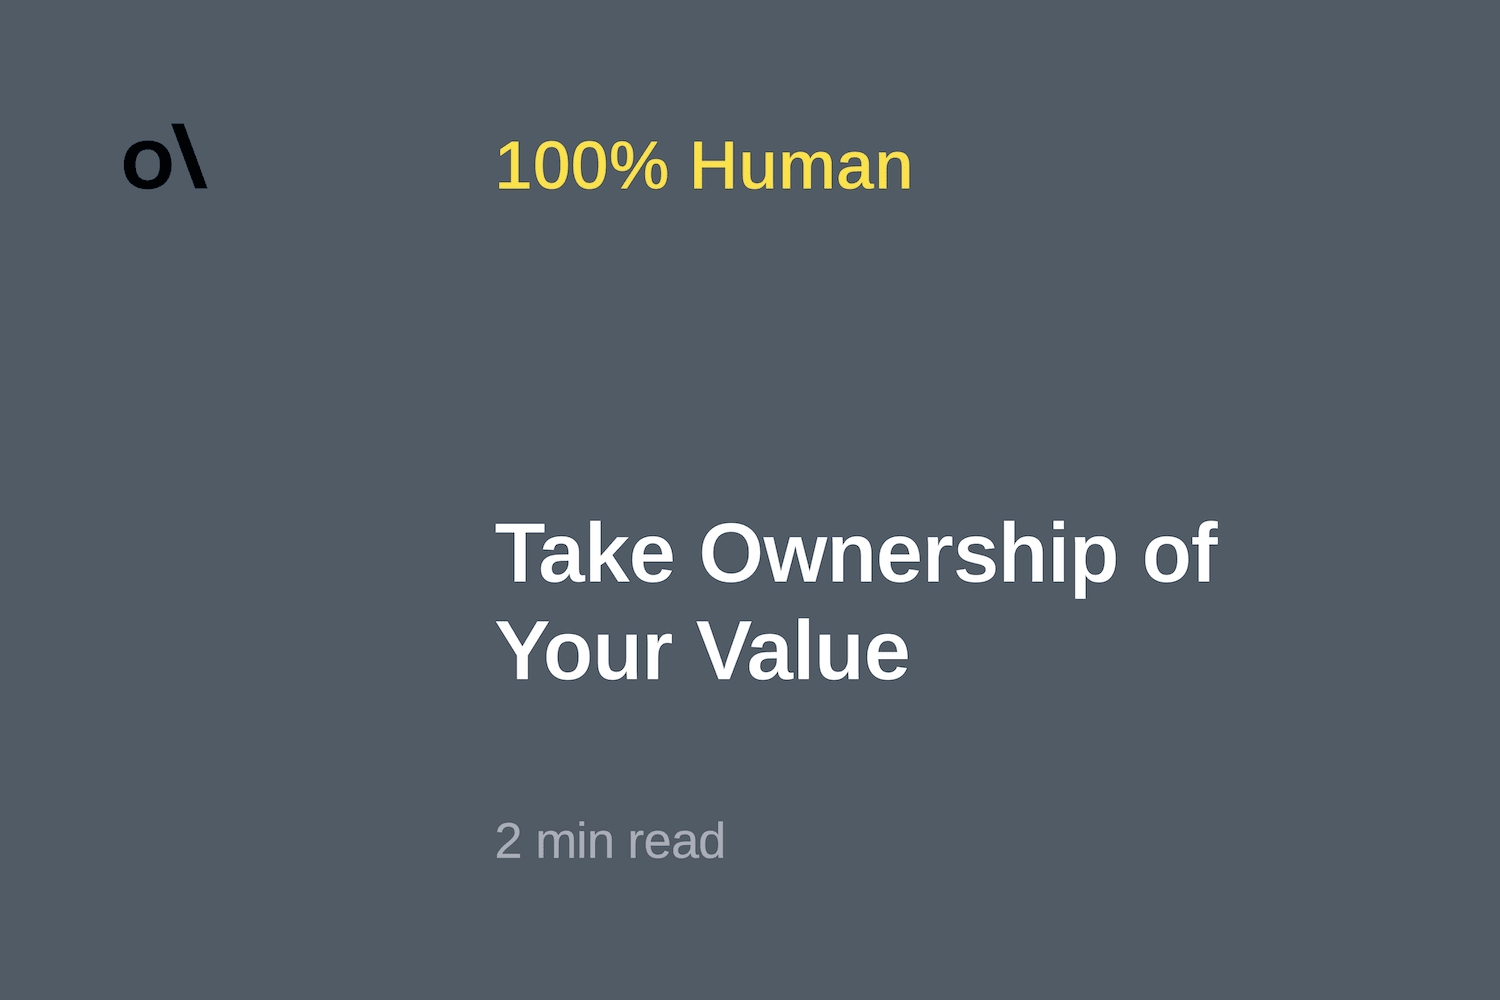 Take Ownership of Your Value